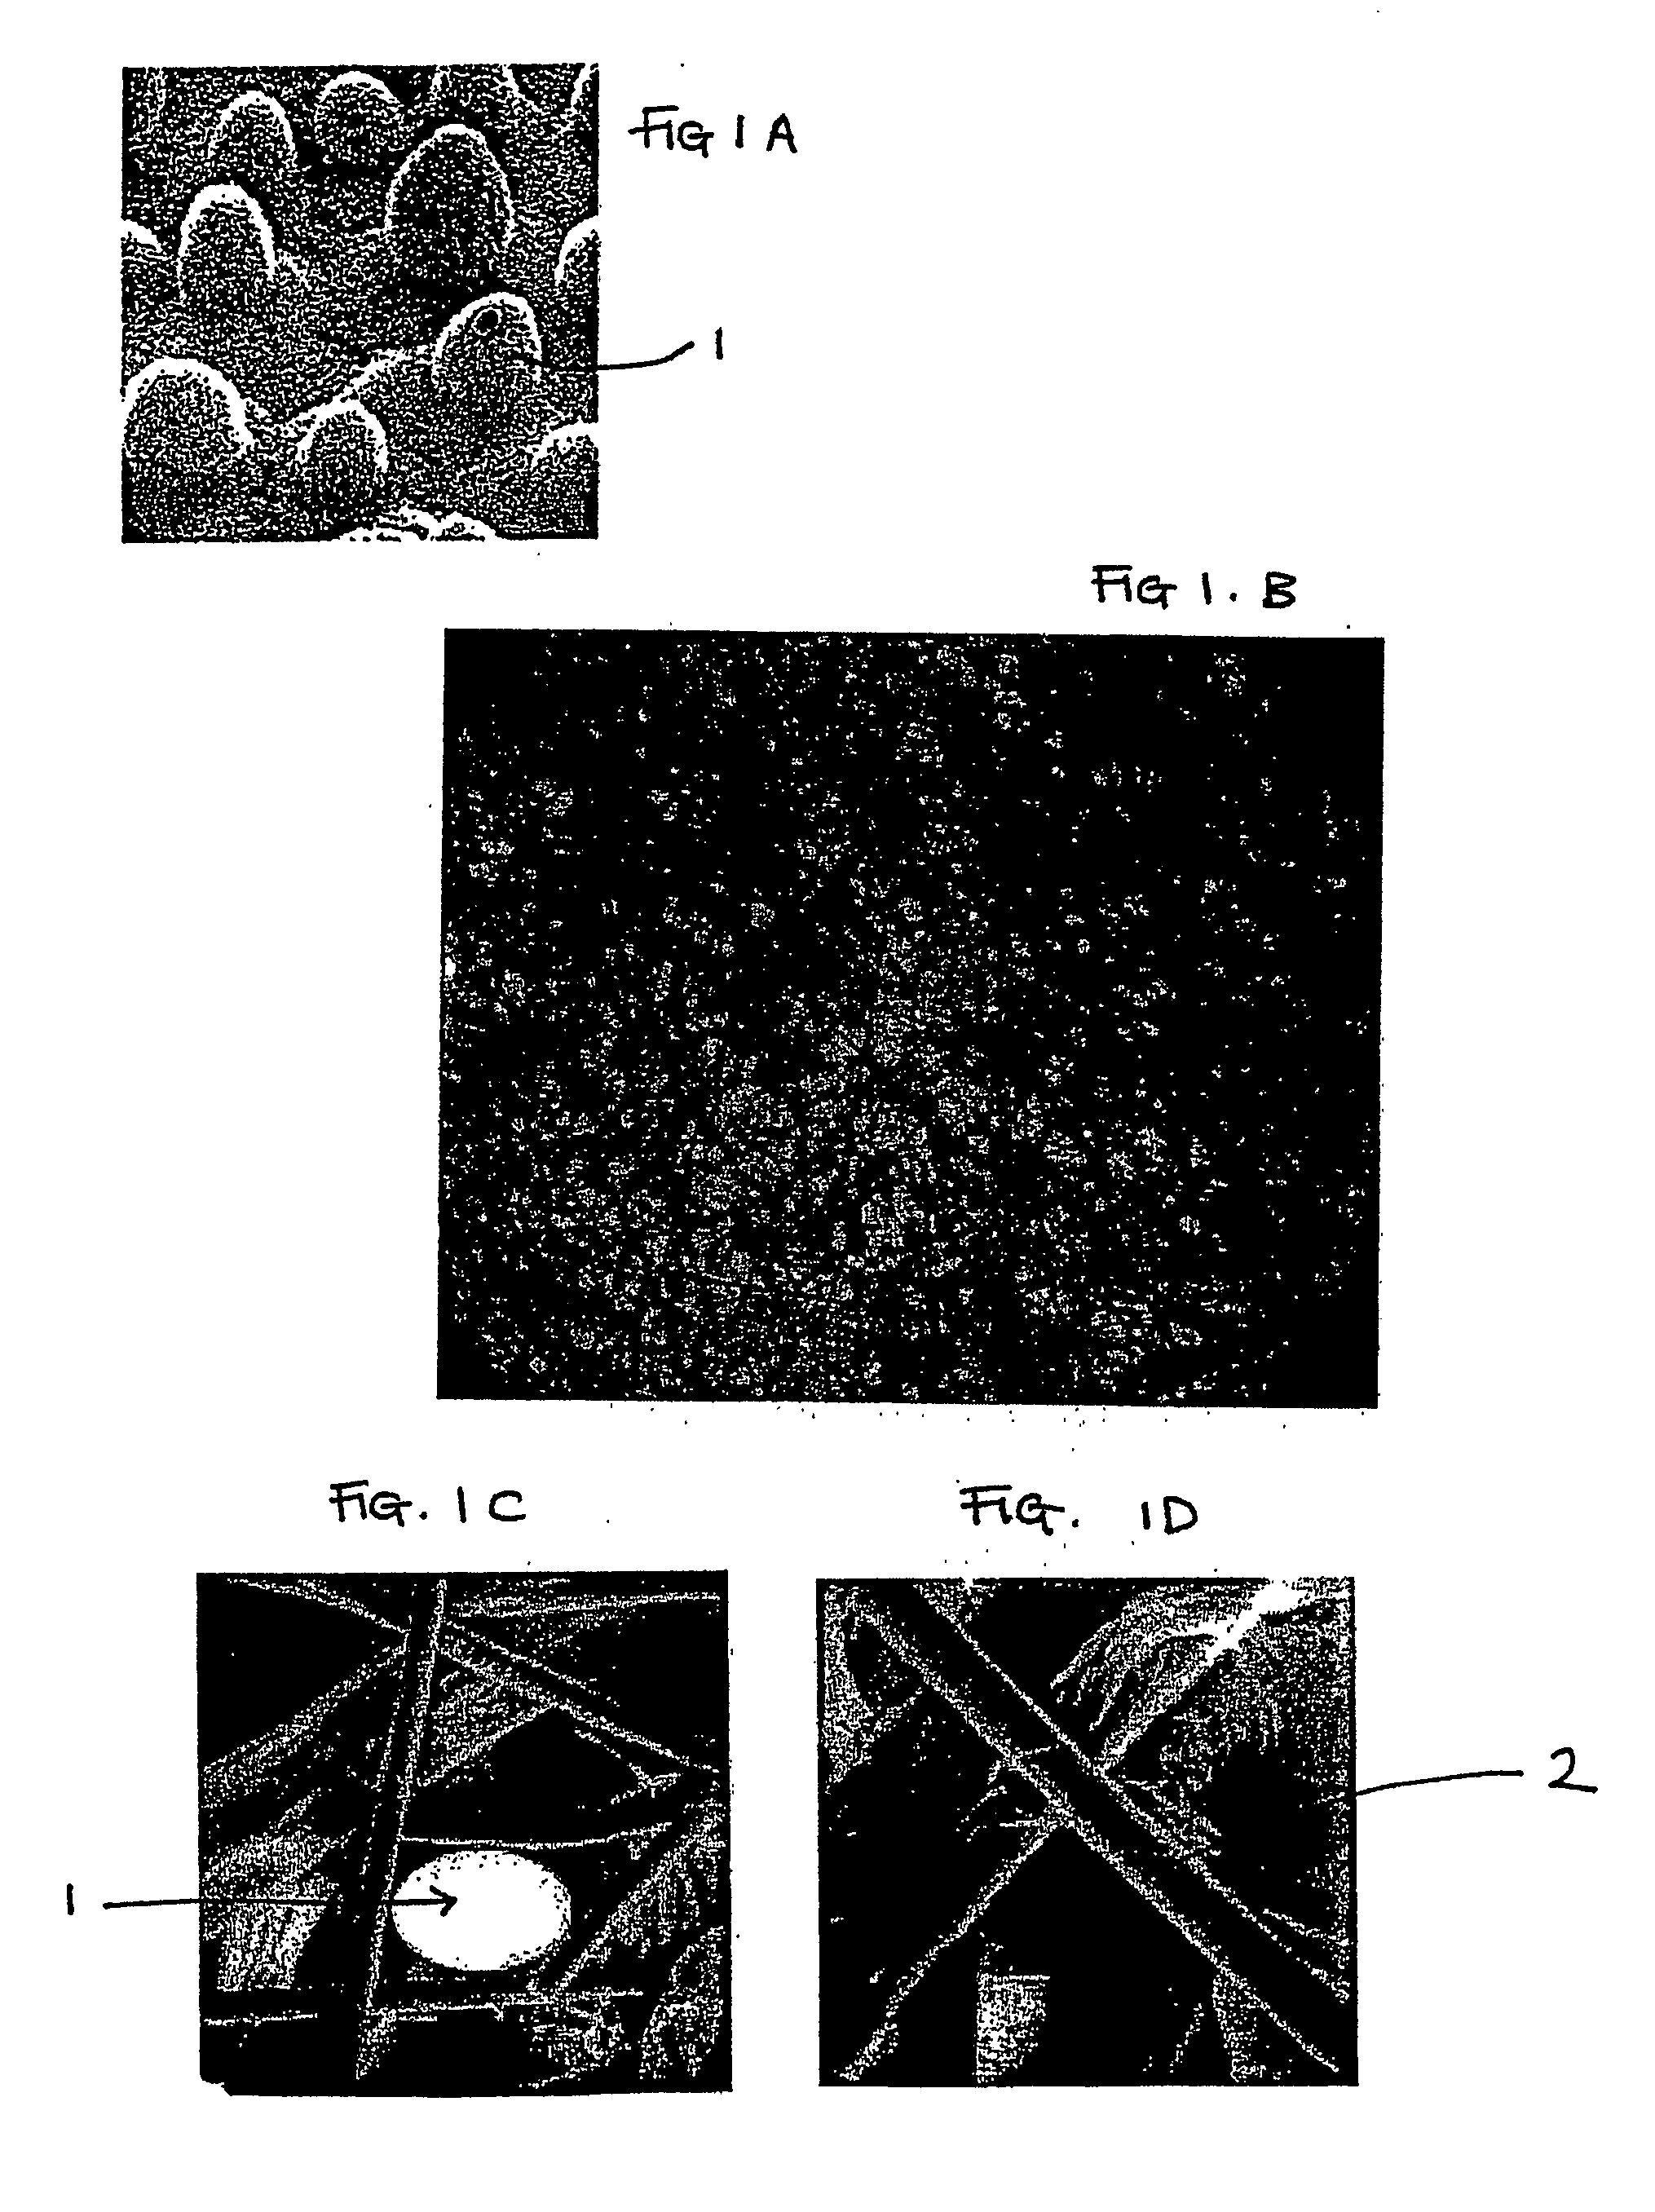 Method and apparatus for bonding and debonding adhesive interface surfaces